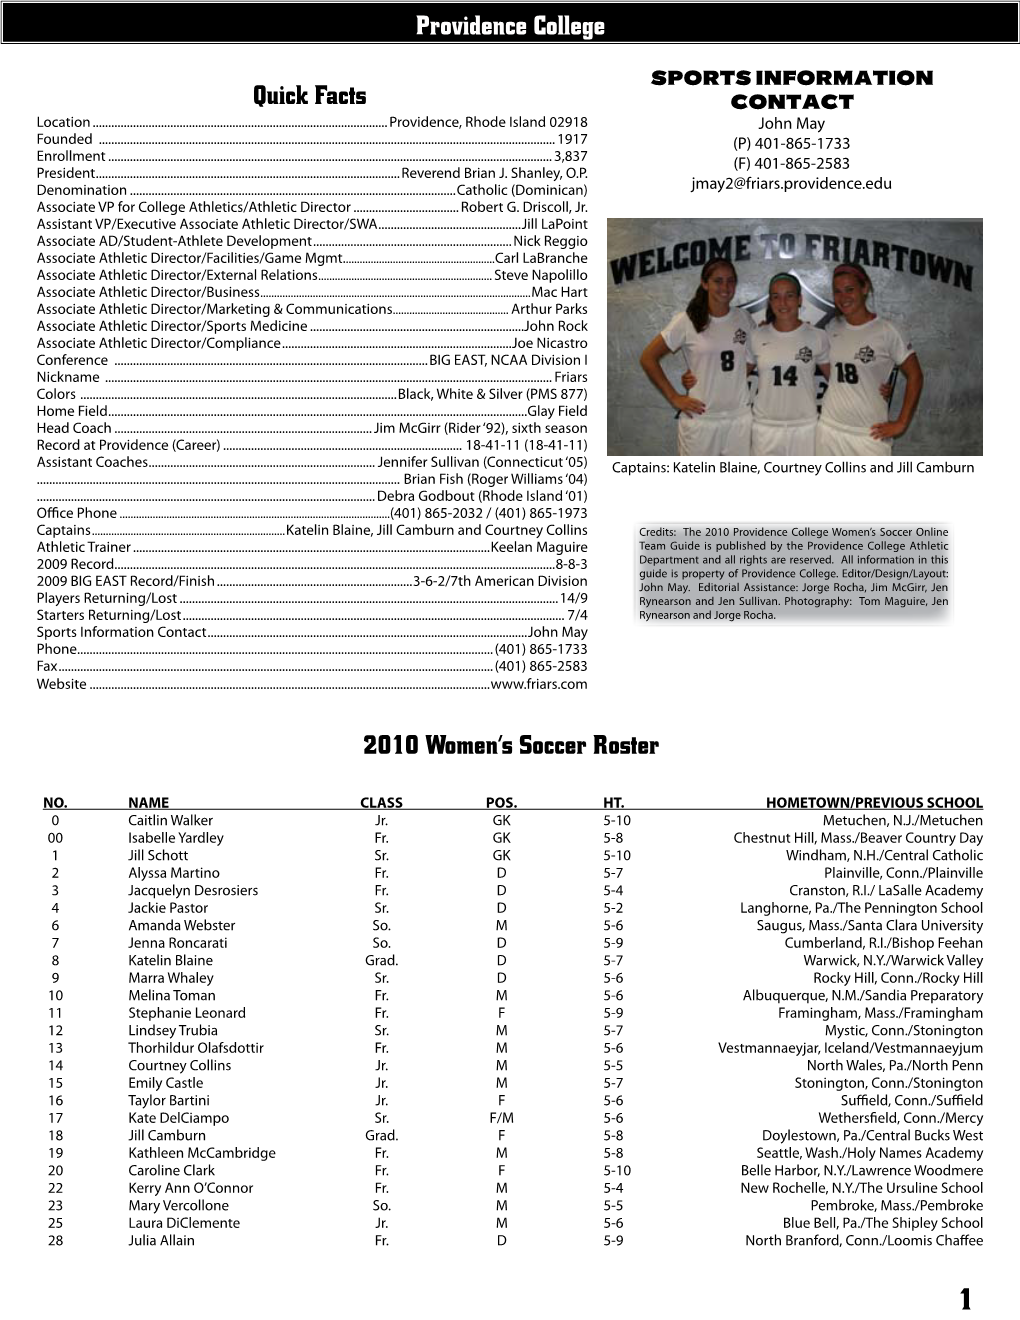 Providence College Quick Facts 2010 Women's Soccer Roster